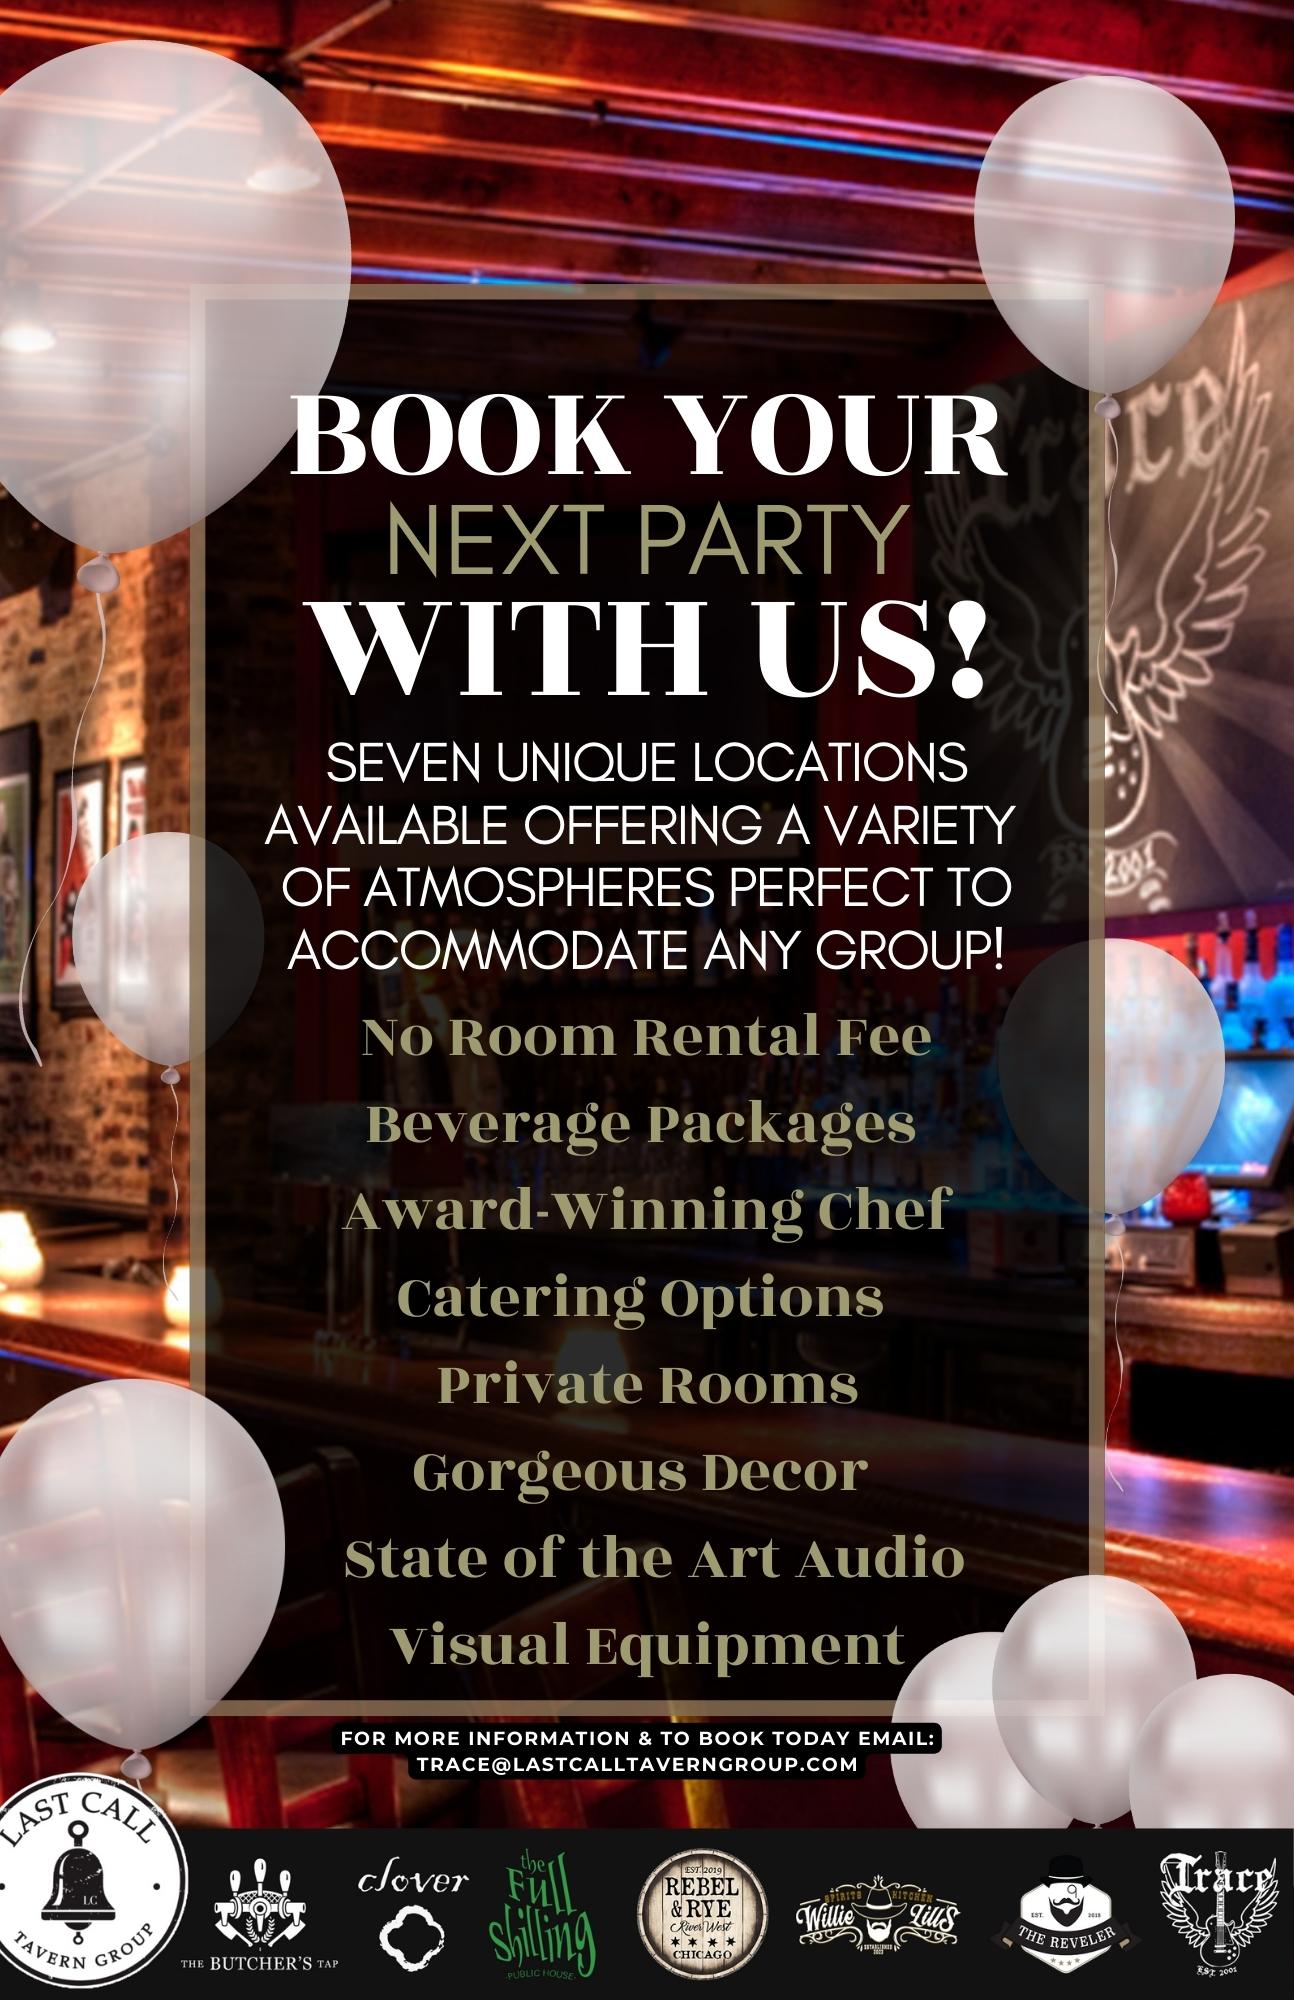 Book Your Next Party With Us!